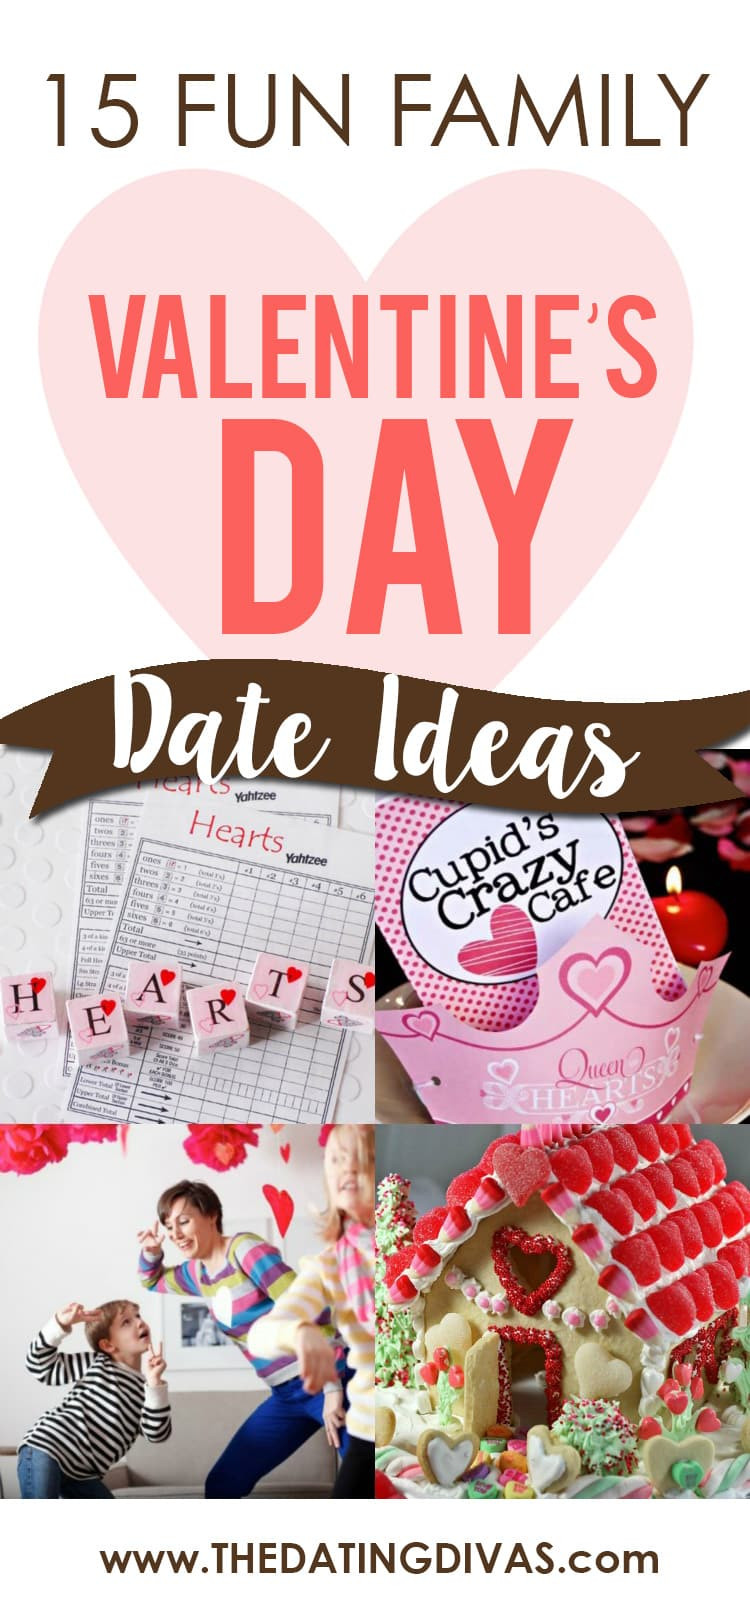 Fun Valentines Day Ideas
 The Top 76 Valentine s Day Date Ideas The Dating Divas